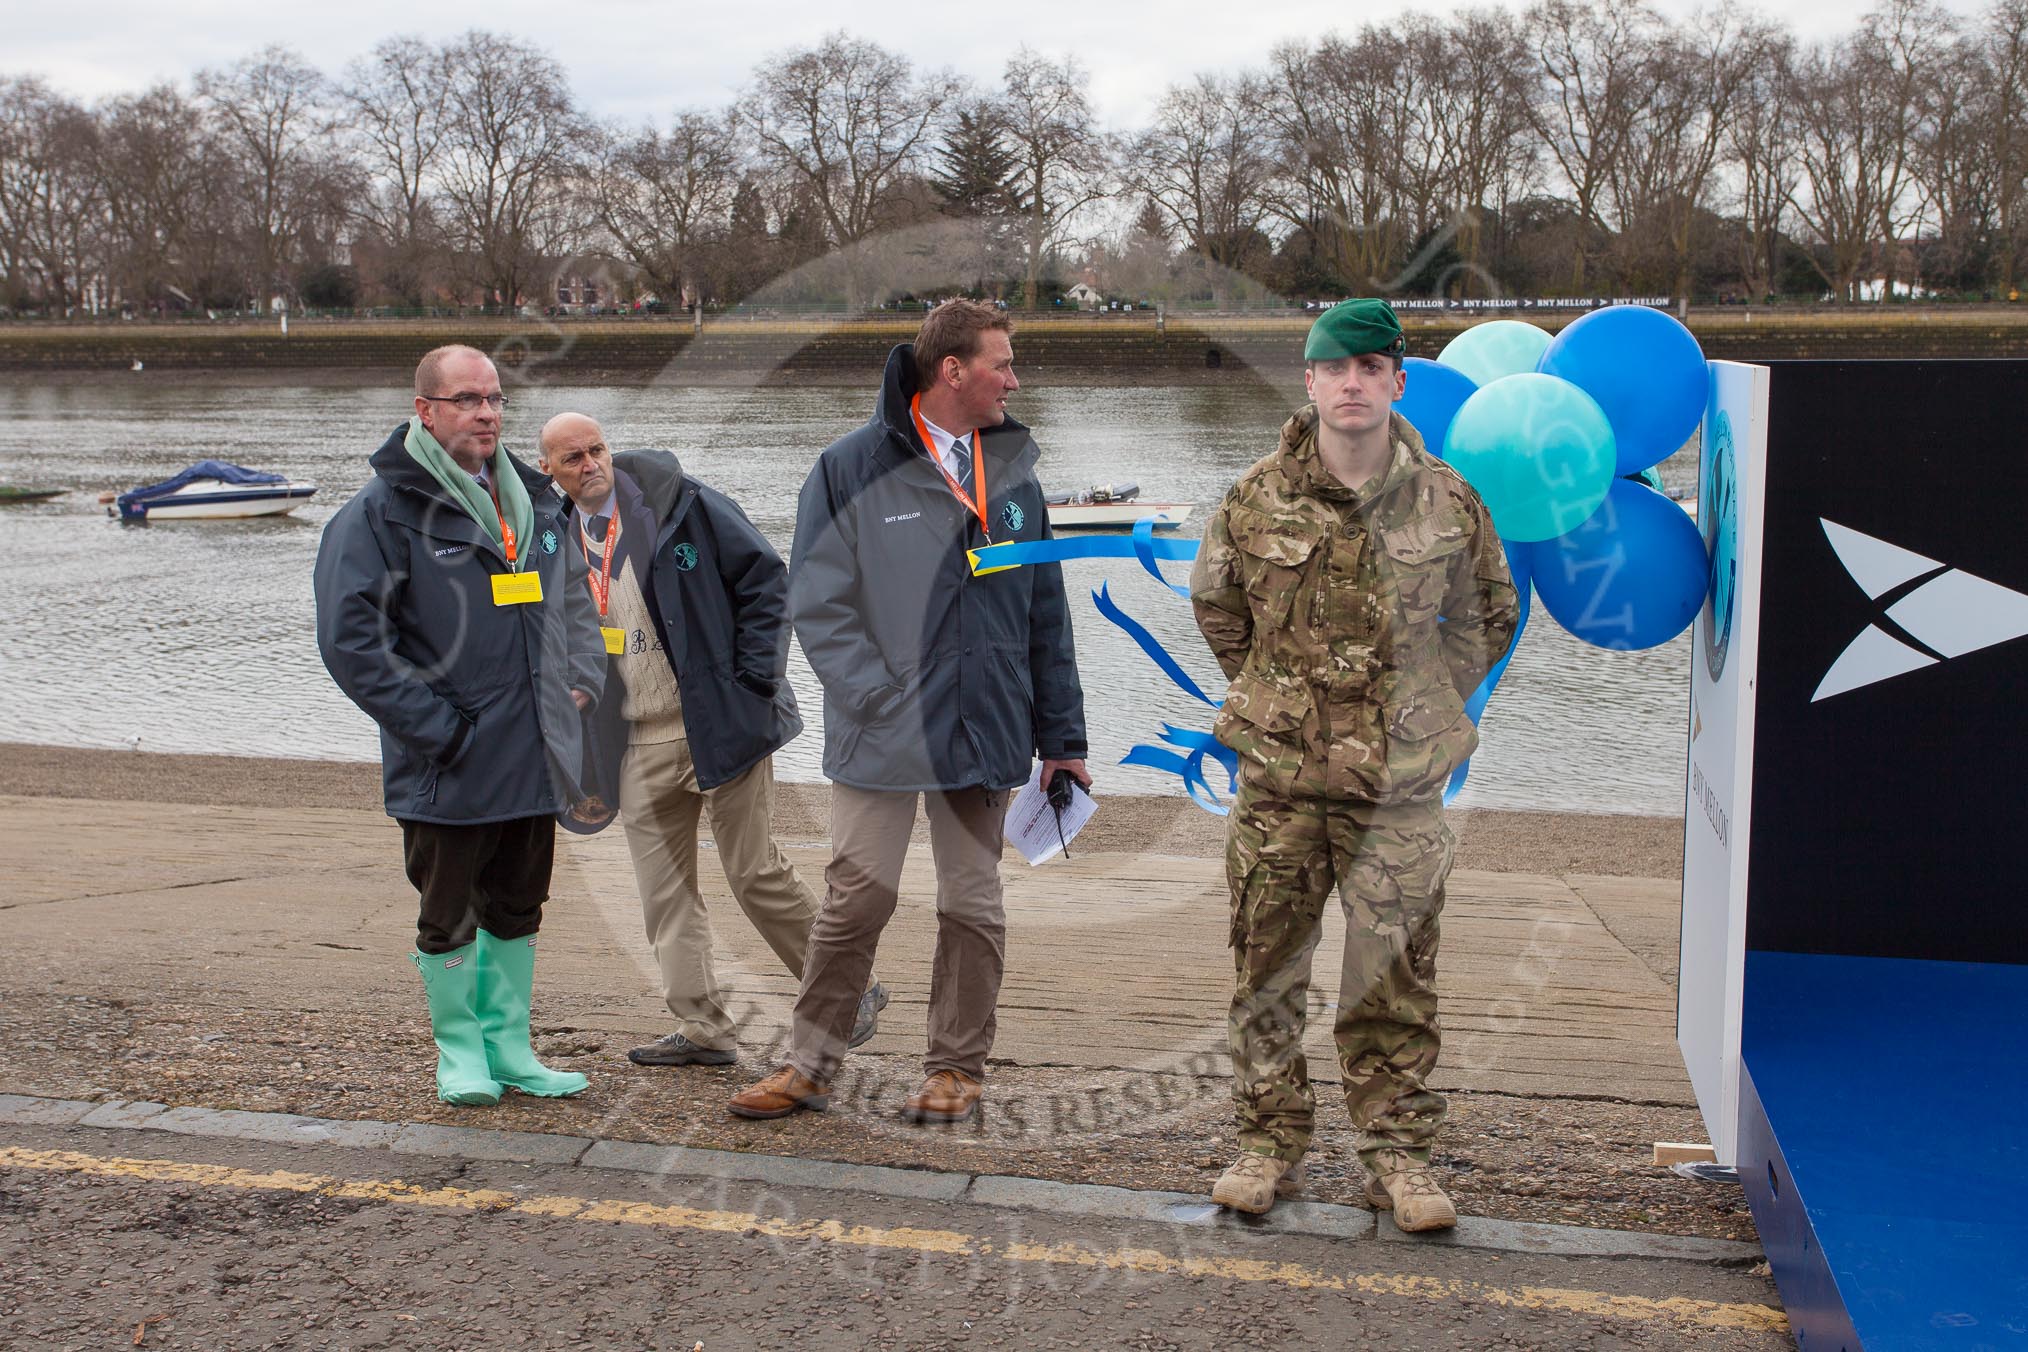 The Boat Race 2013: Minutes before the toss of the coin - a member of the BBC production team, umpire Boris Rankov, in charge of the Isis/Goldie race toss, umpire Sir Matthew Pinsent, in charge of the Blue Boat toss, and a Royal Marine guarding the trophy..
Putney,
London SW15,

United Kingdom,
on 31 March 2013 at 14:22, image #74